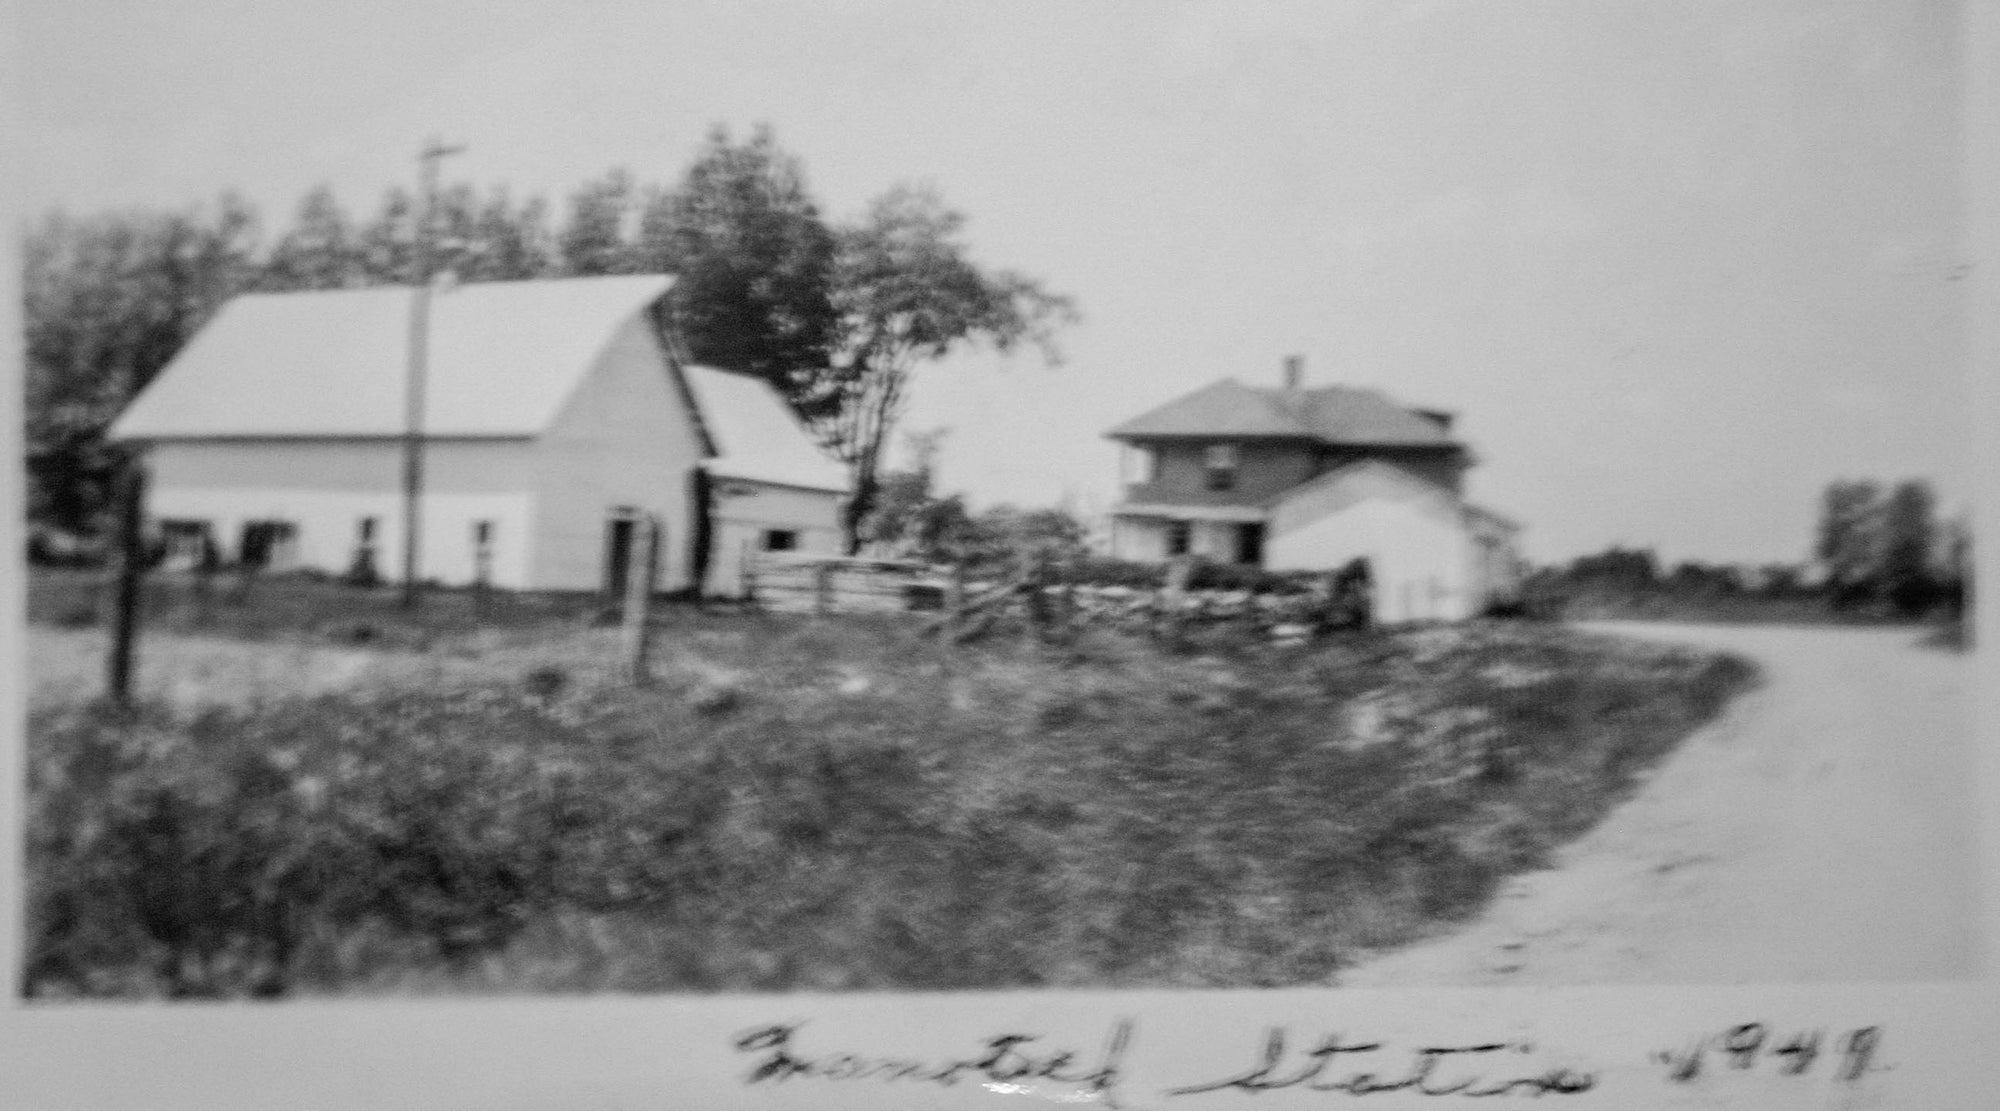 Photo of a barn in Manotick Station, Outside of Ottawa, Ontario Canada from 1949